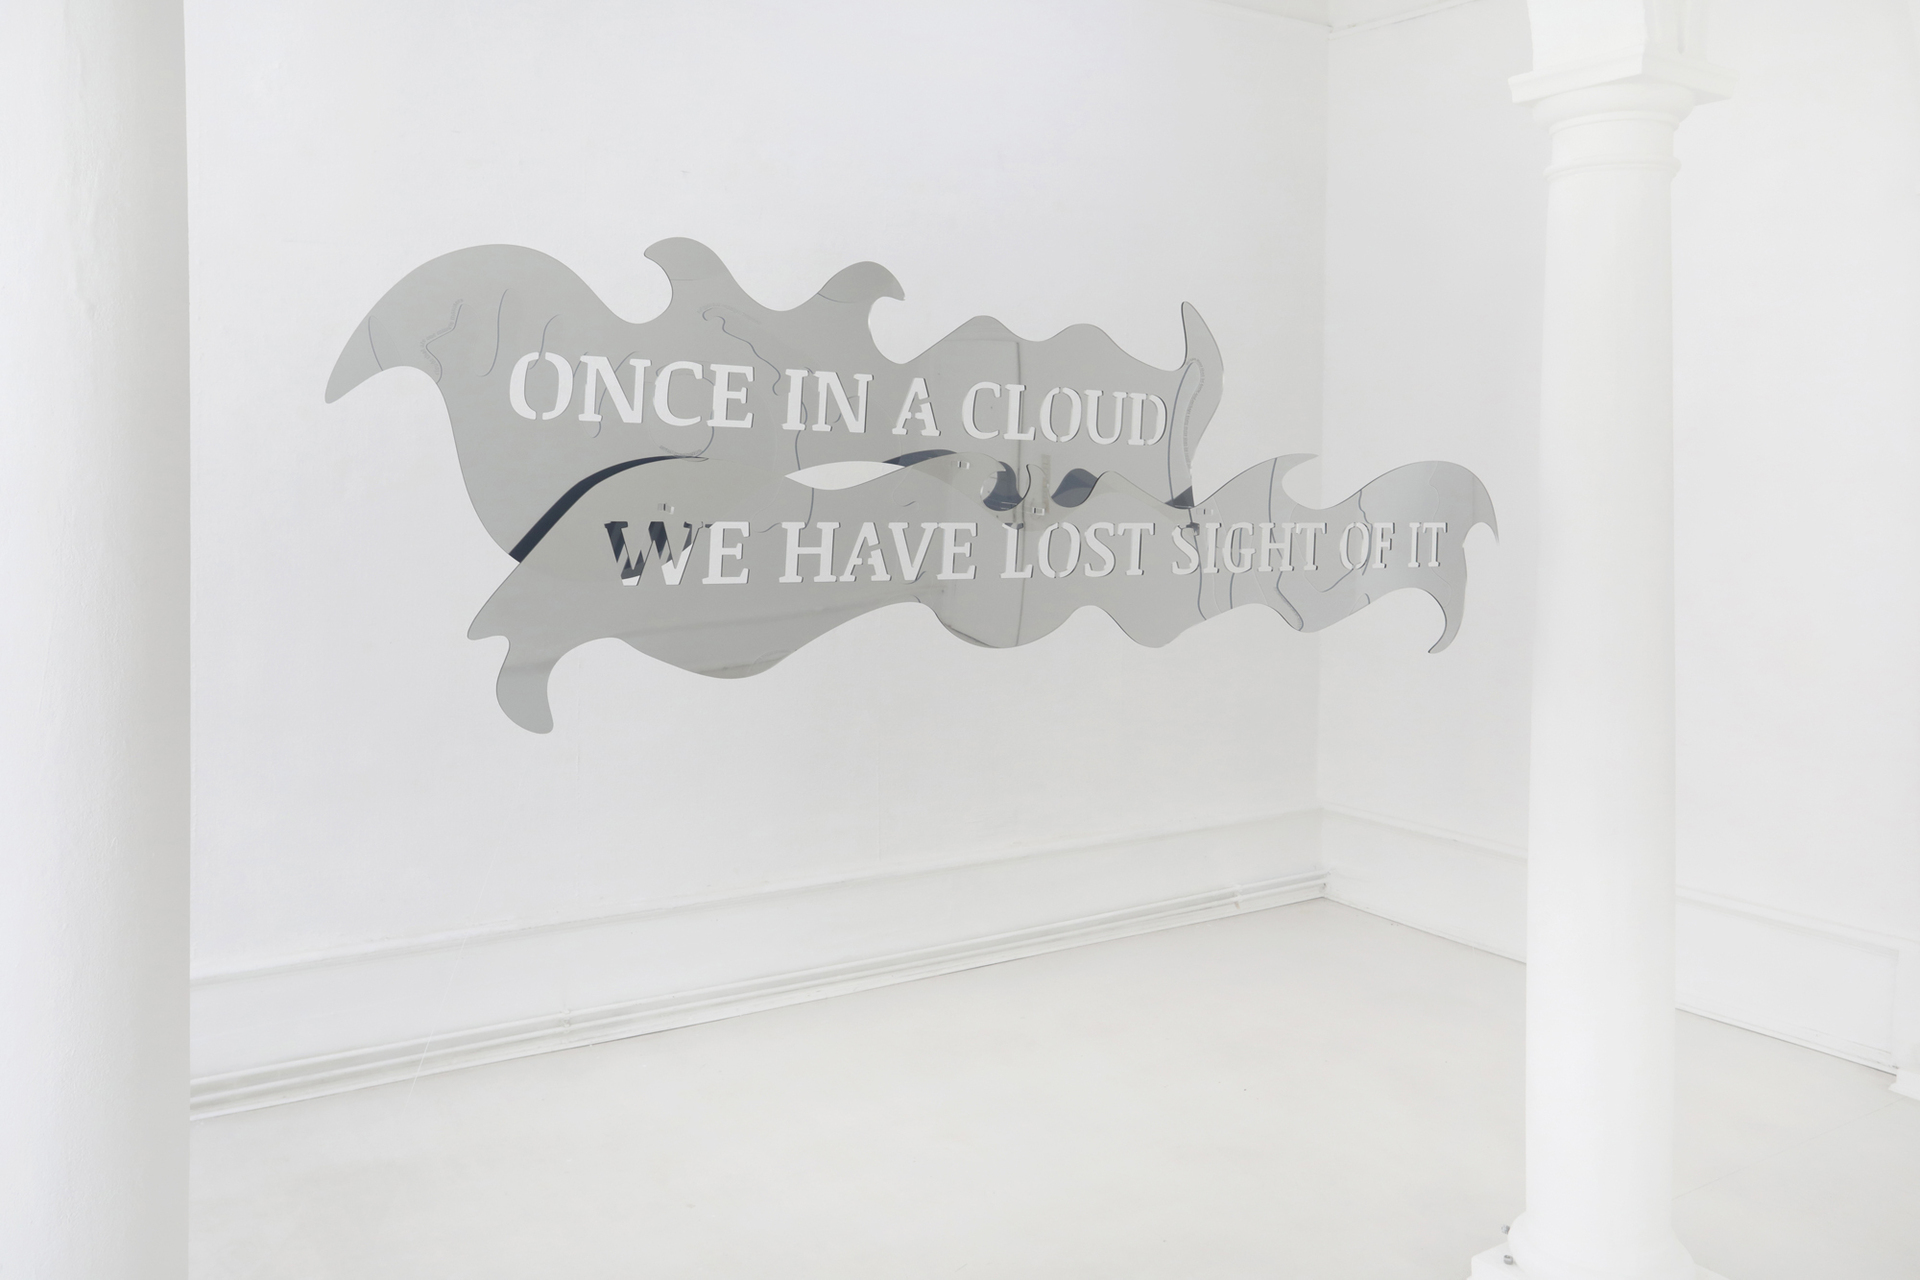 Lena Marie Emrich, "Once in a cloud we have lost sight of it", 2020, Plexiglass, Two-way mirror, 220 x 65 x 12 cm